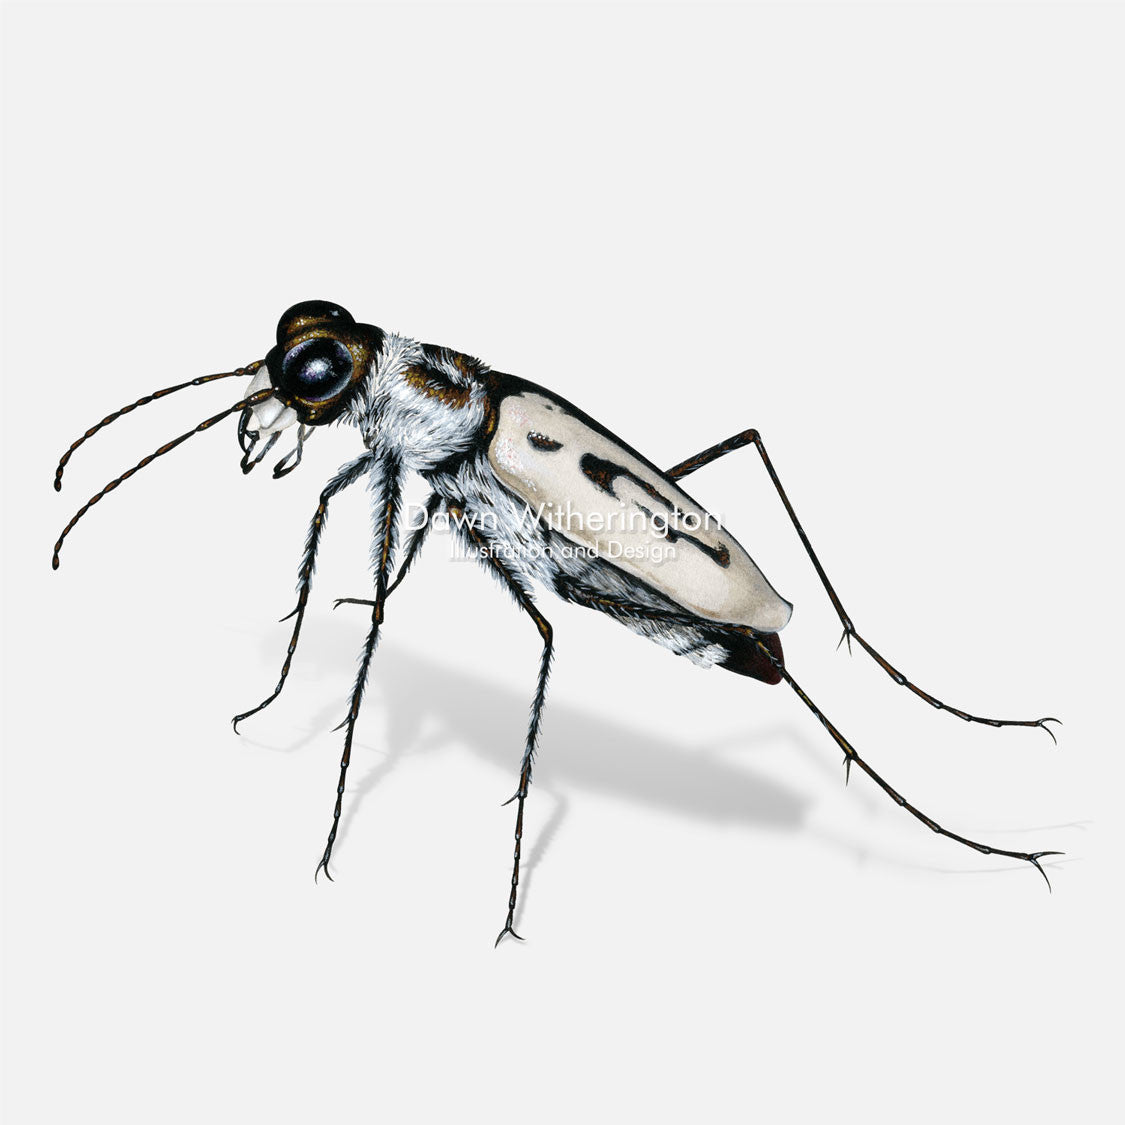 This wonderful illustration of a a white beach tiger beetle, Cicindela dorsalis, is biologically accurate in detail.